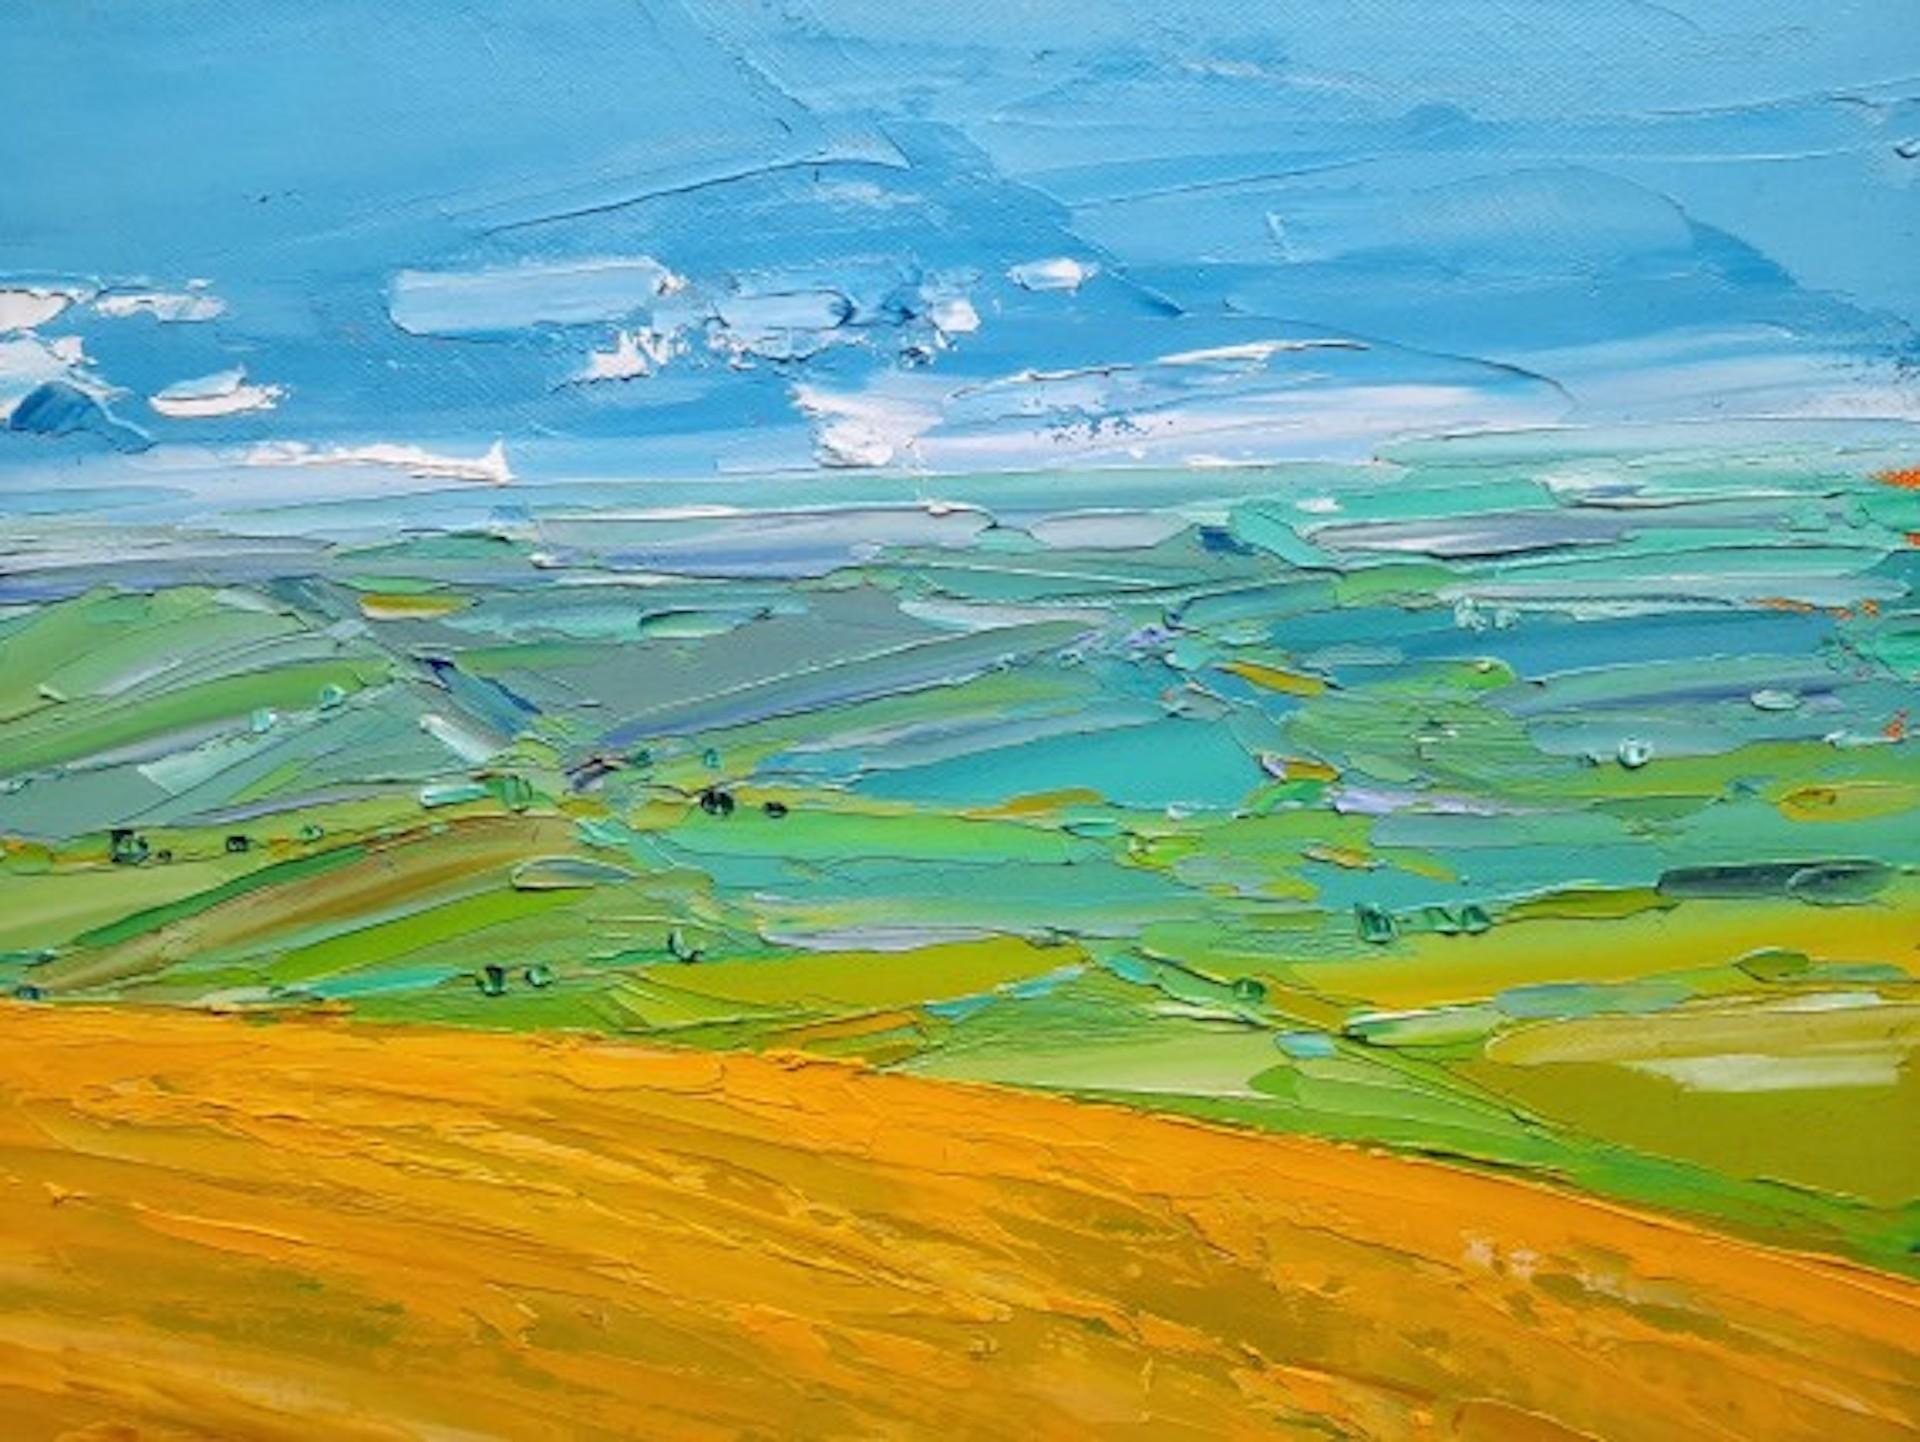 Barley Field View by Georgie Dowling [2021]
Original
Oil paint on canvas
Image size: H:40 cm x W:50 cm
Complete Size of Unframed Work: H:40 cm x W:50 cm x D:2cm
Sold Unframed
Please note that insitu images are purely an indication of how a piece may